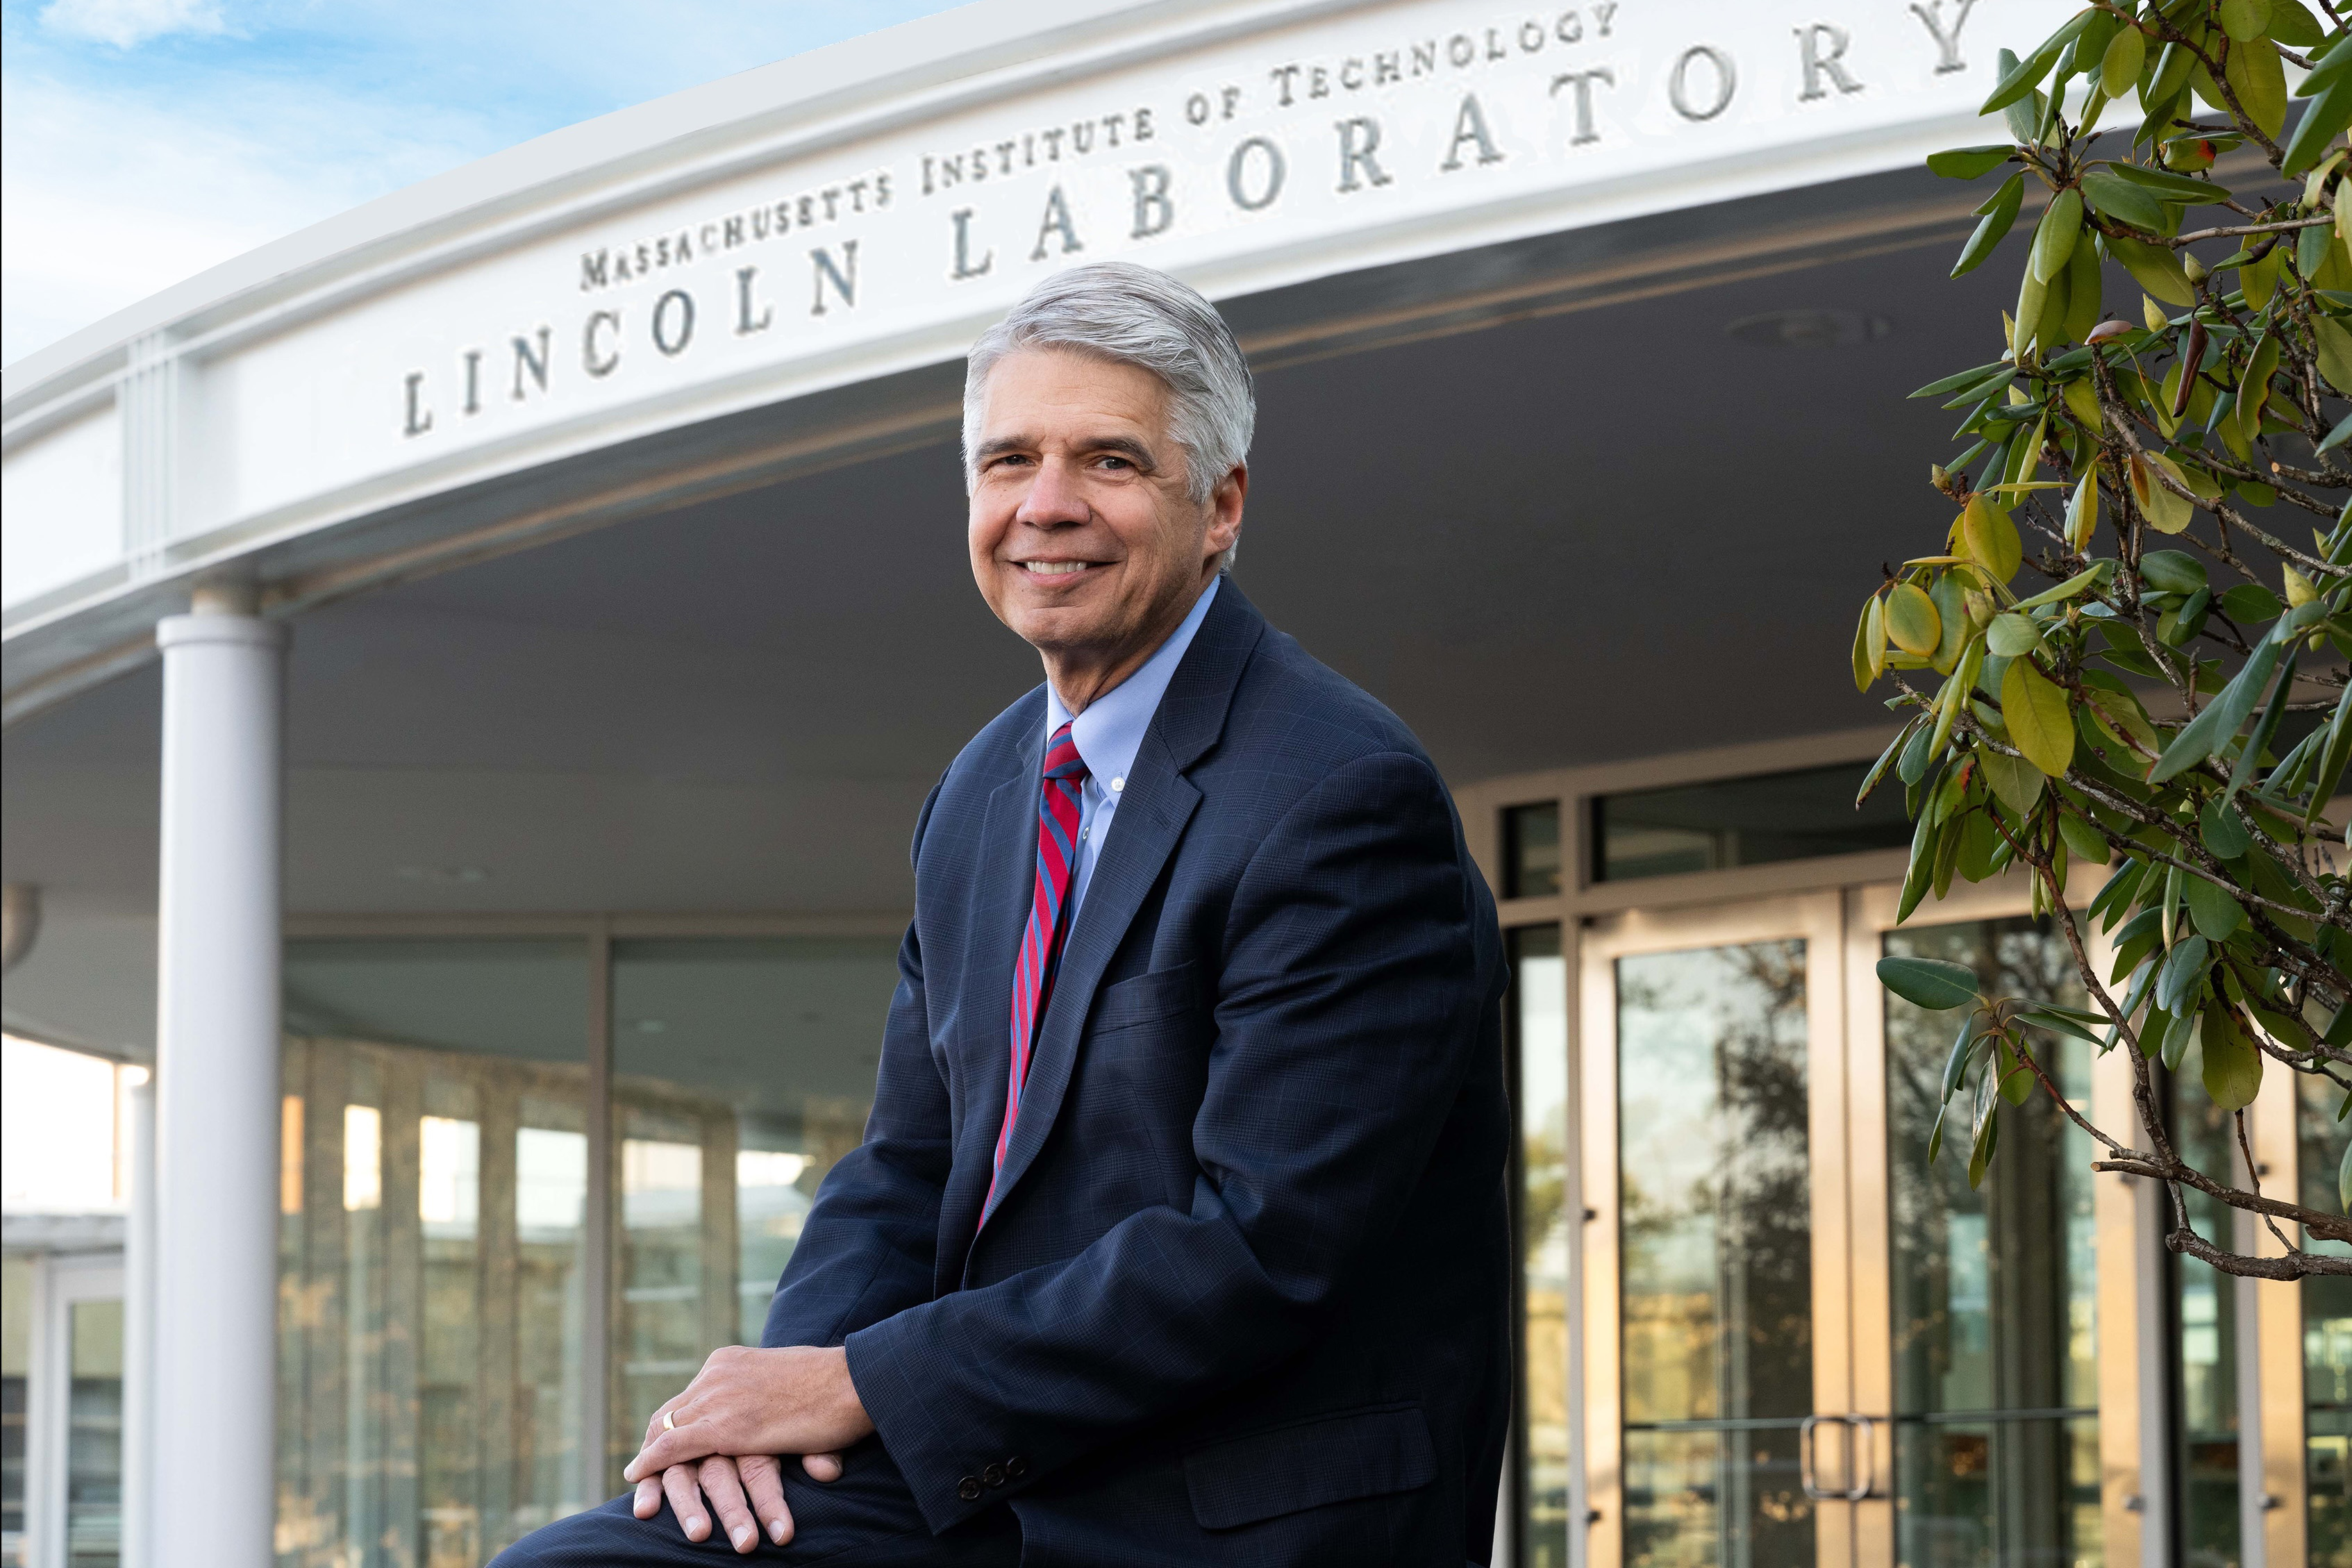 Eric Evans to step down as director of MIT Lincoln Laboratory